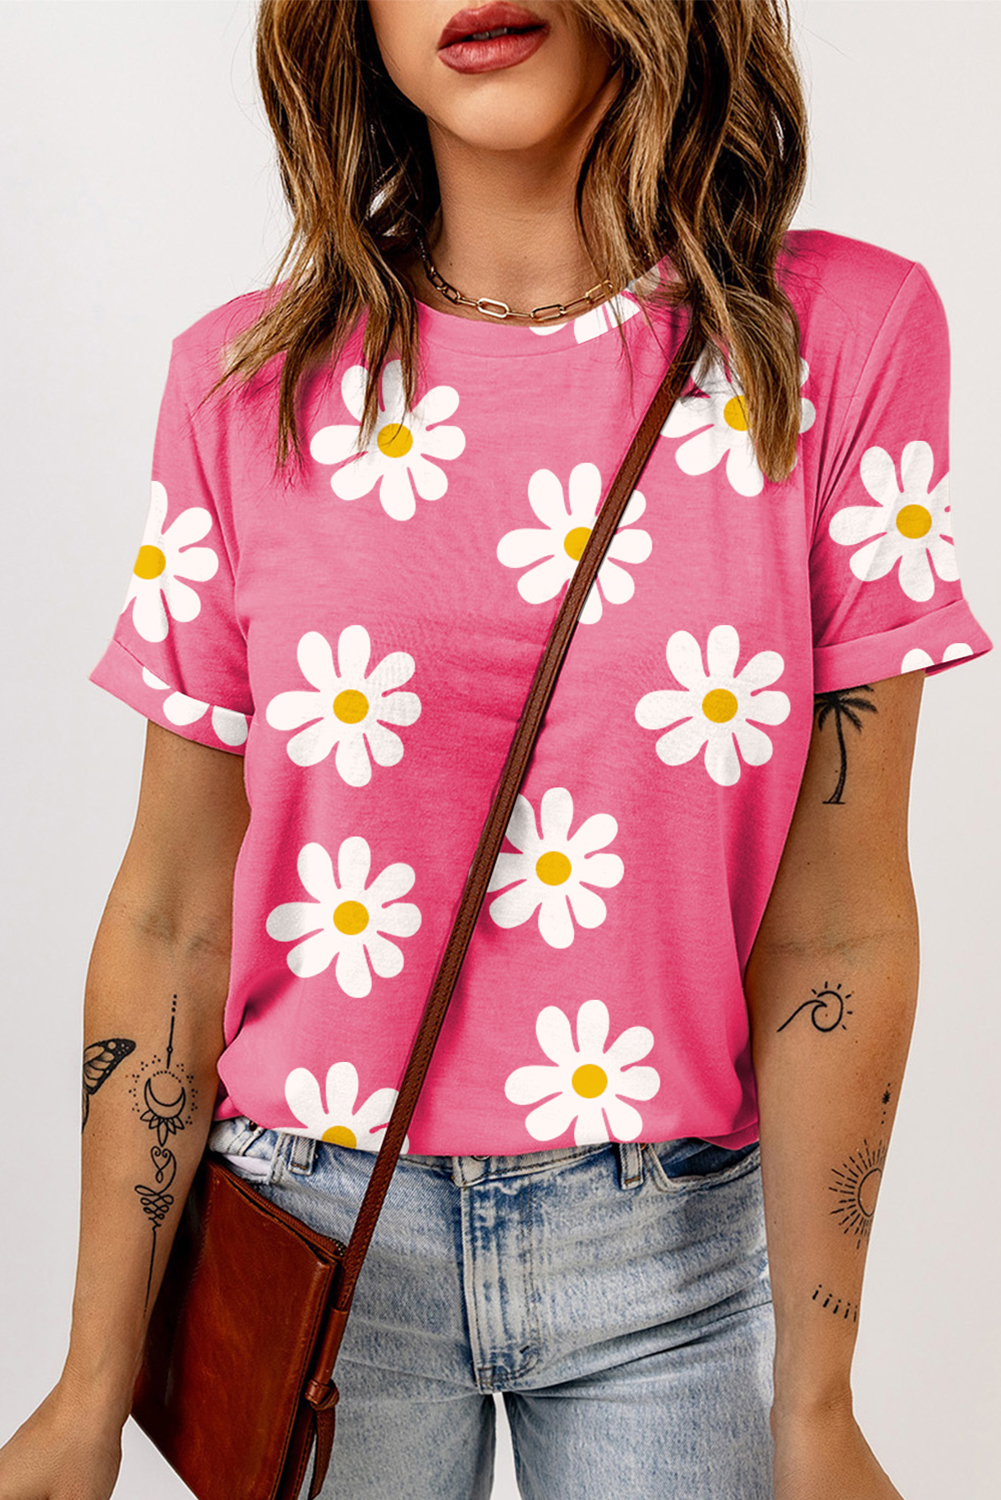 Shewin Wholesale NEW arrival Pink Daisy Print Crewneck T Shirt